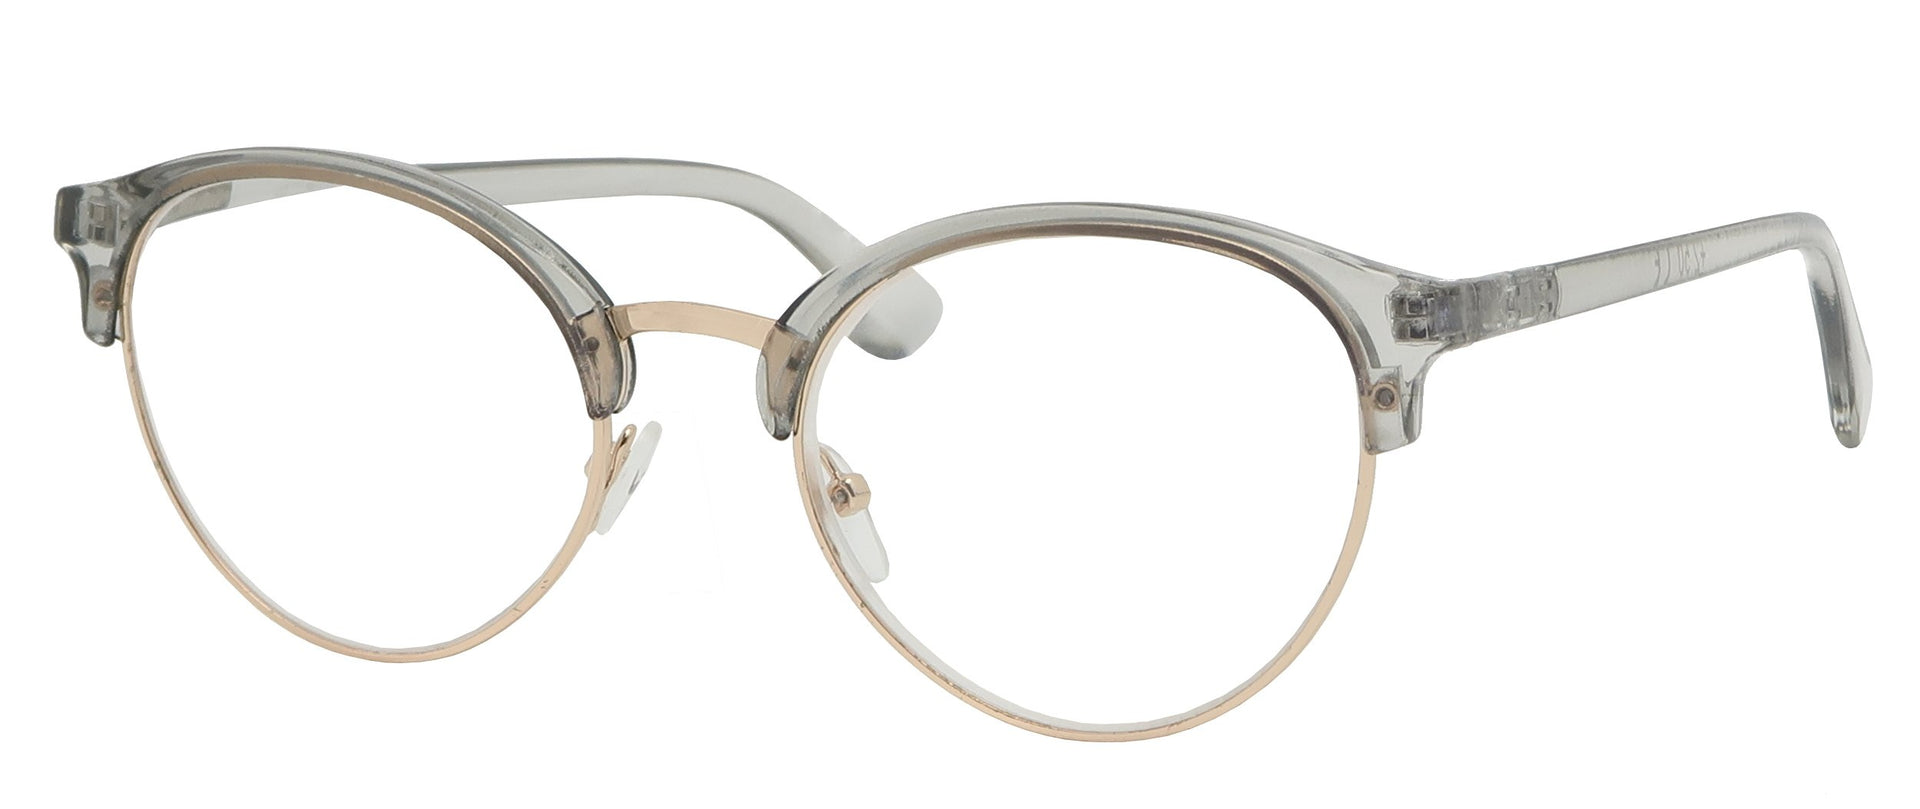 ST5915R - Wholesale Women's Translucent Browline Metal Reading Glasses in Grey